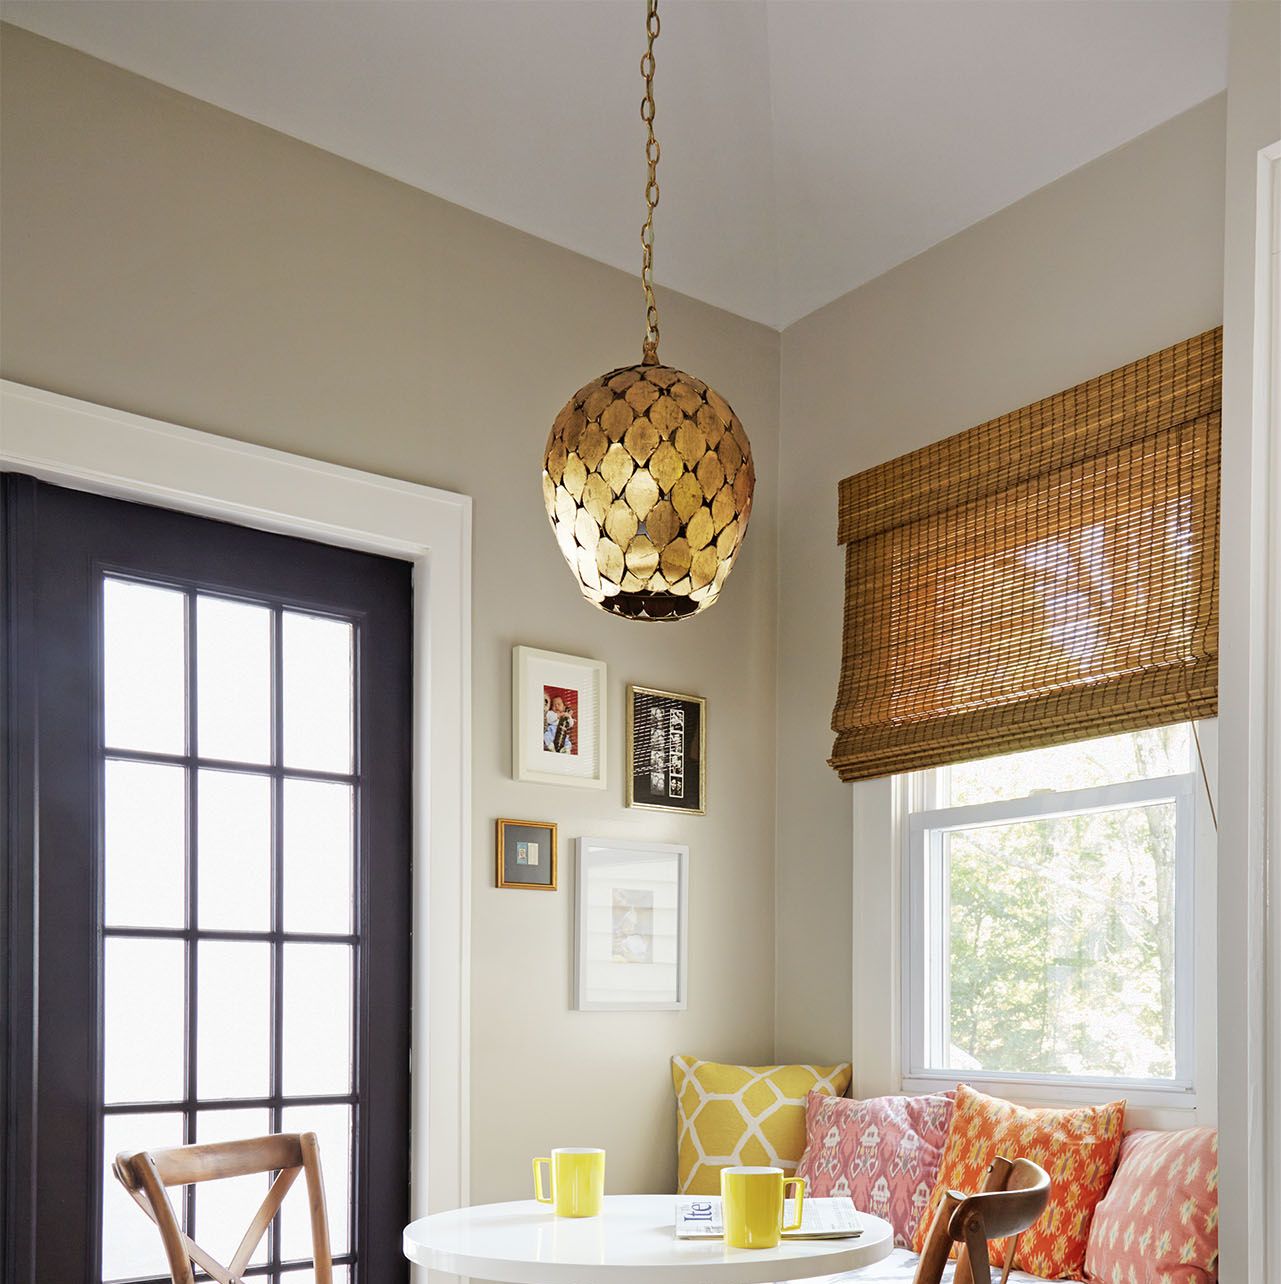 breakfast nook with bench